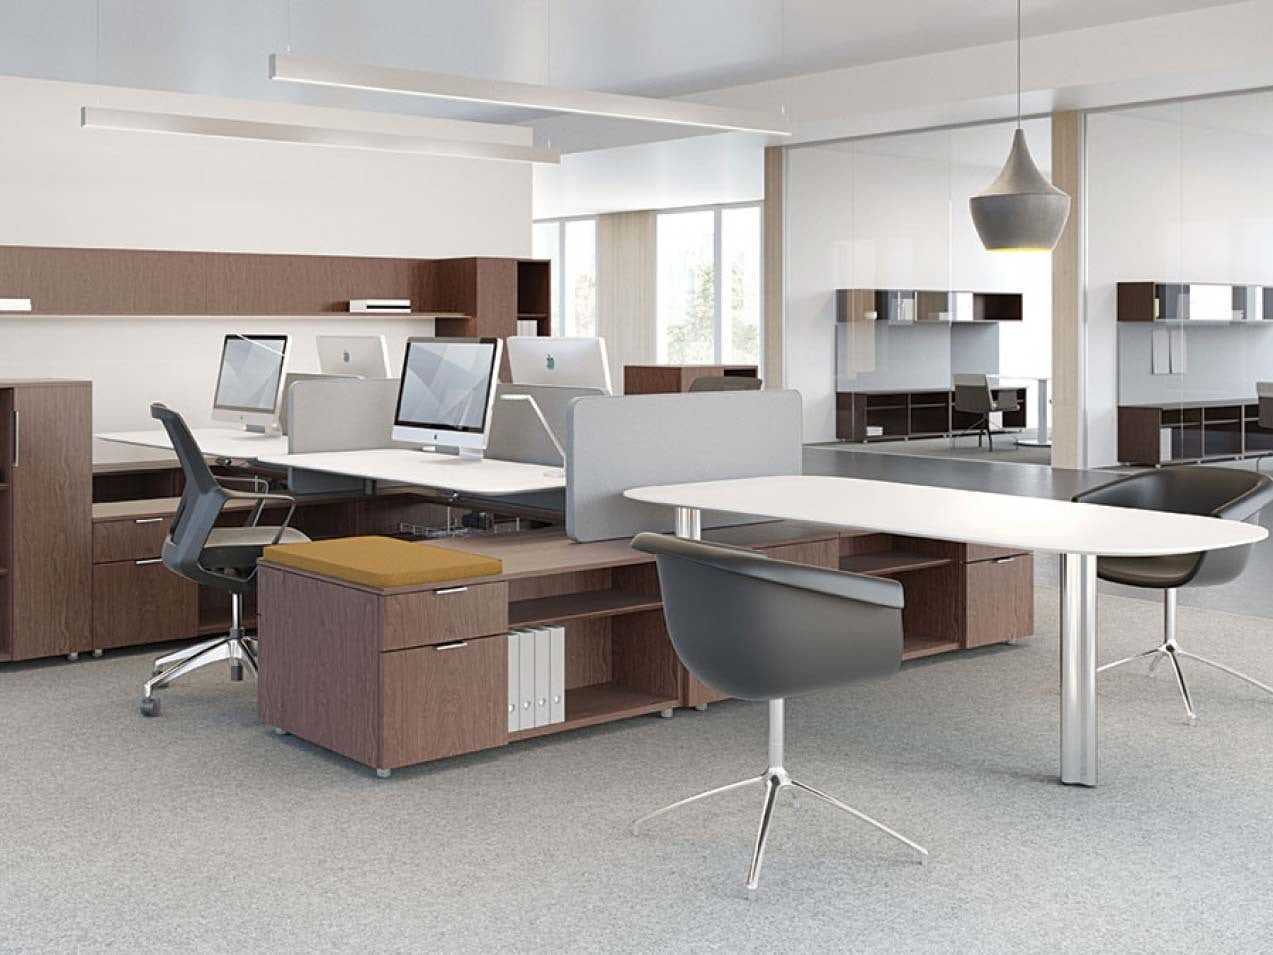 OFFICE FURNITURE FOR A MIAMI-BASED NEWSROOM